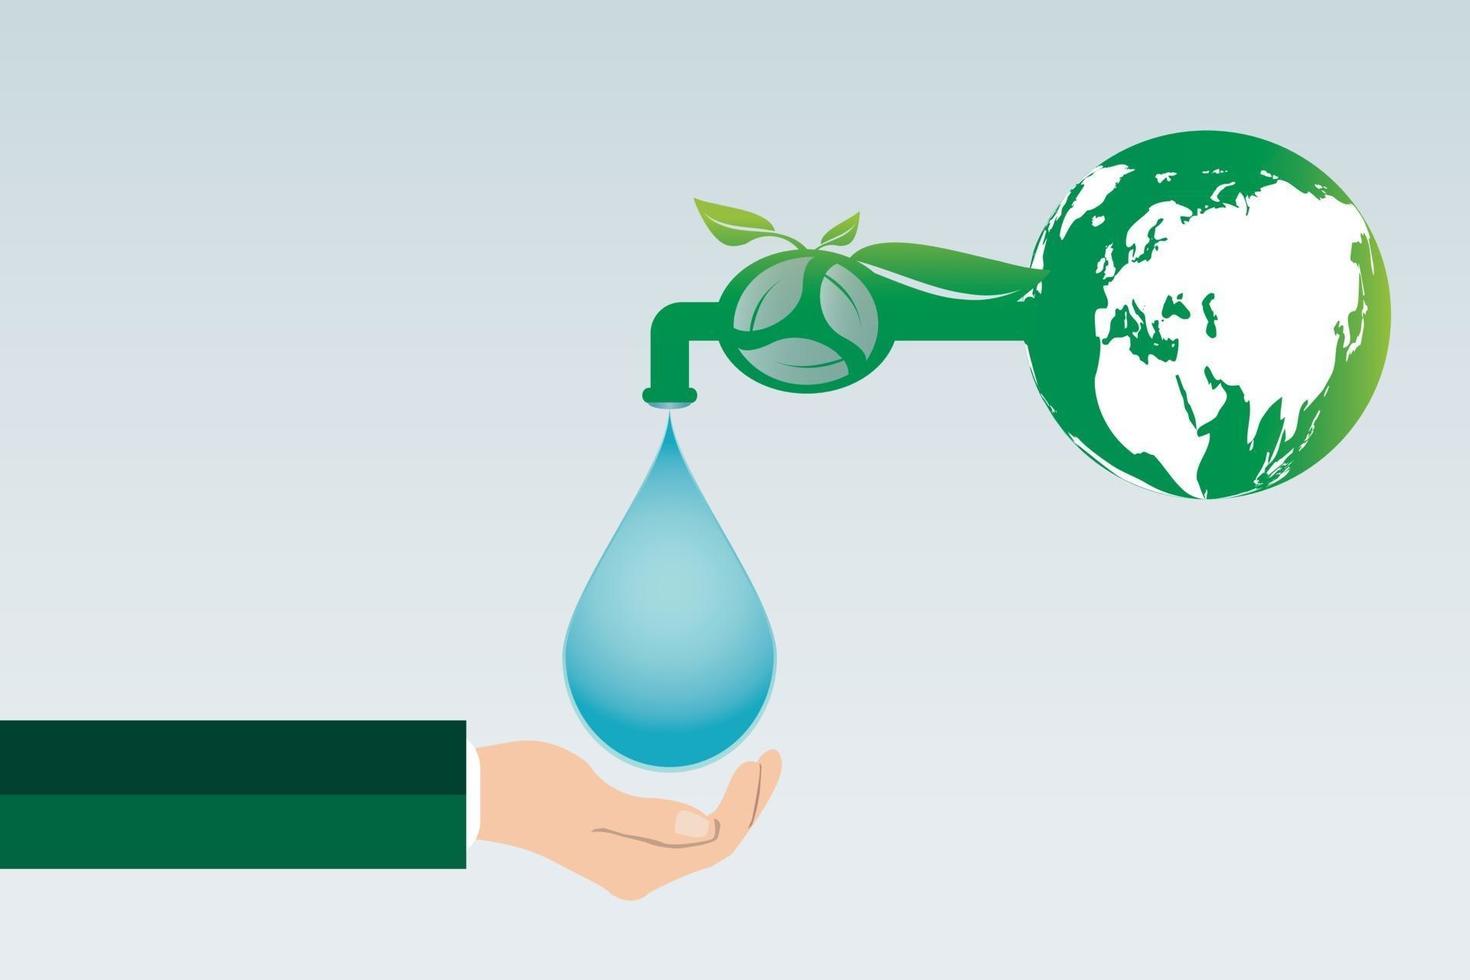 Ecology save water clean energy recycling and hand holding Green cities help the world with eco friendly concept ideas vector